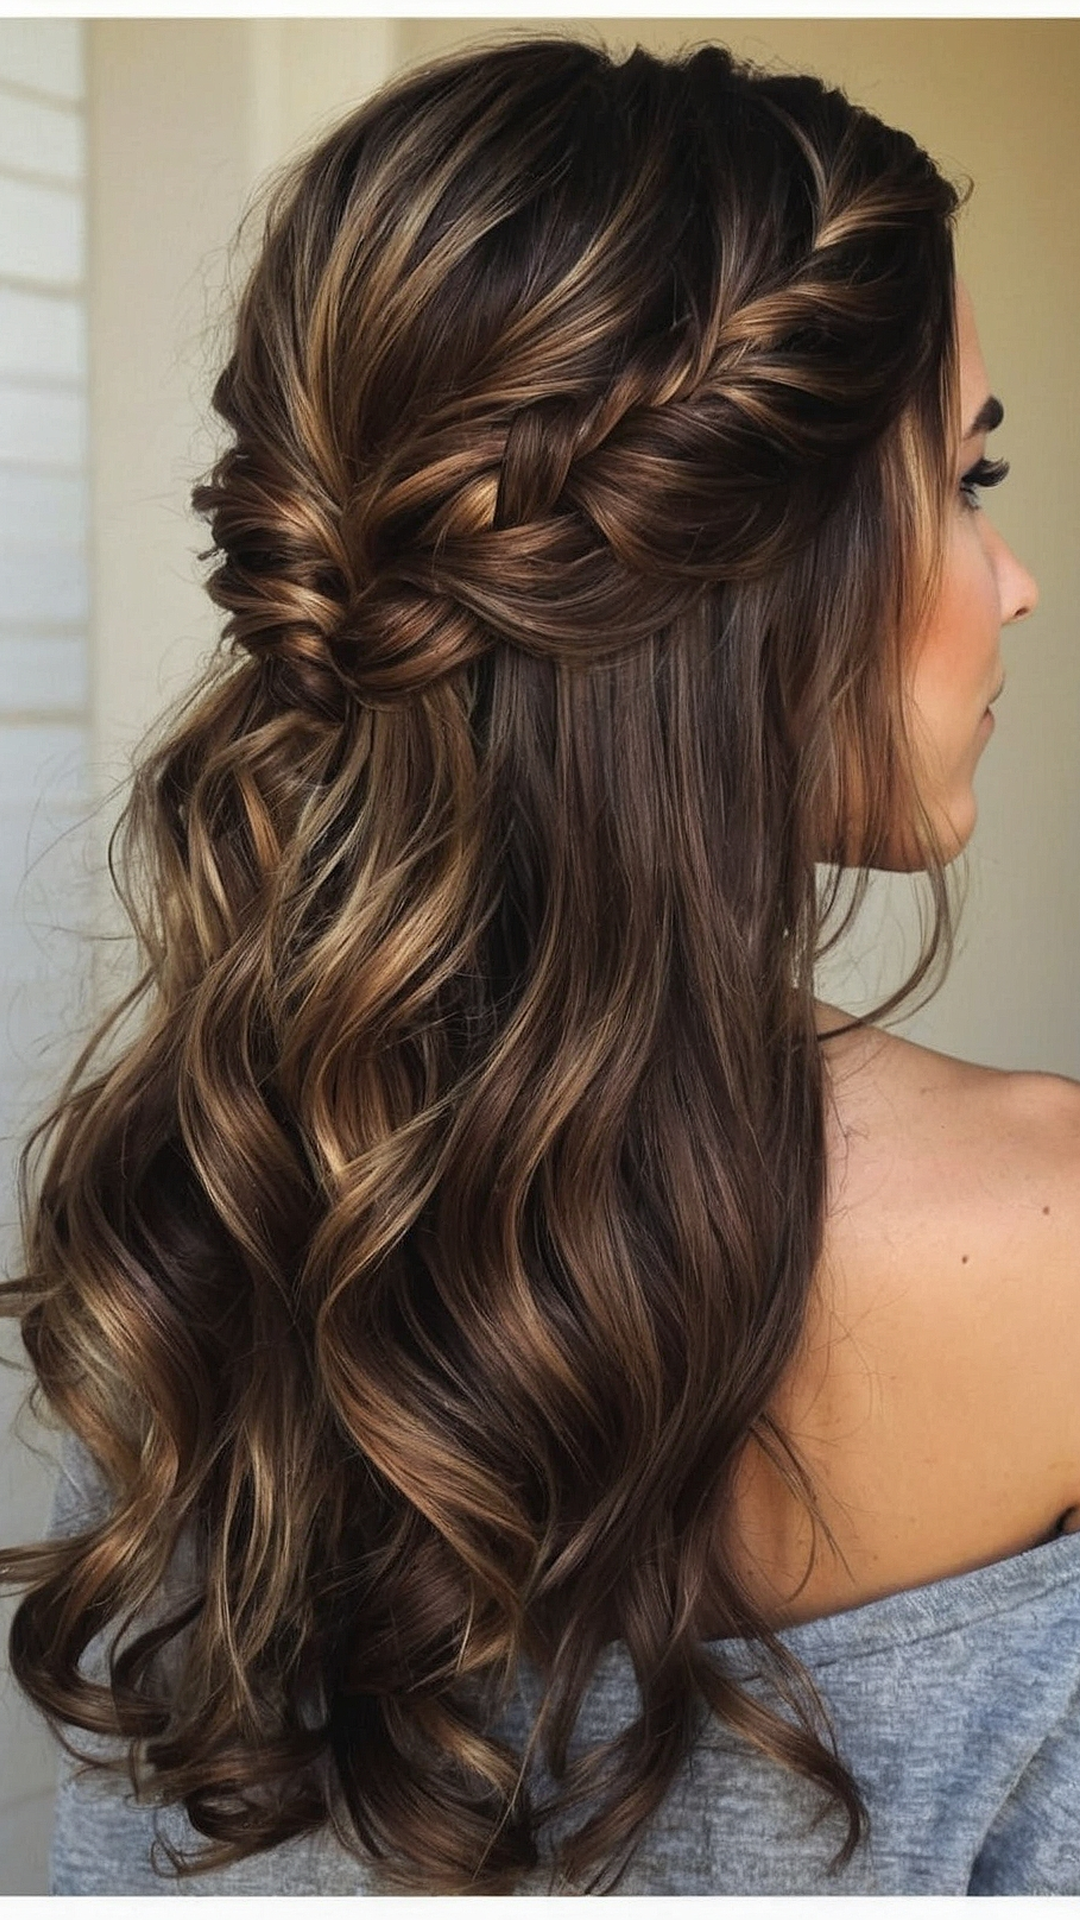 Beachy Waves and Braids: Hot Summer Hairstyle Ideas